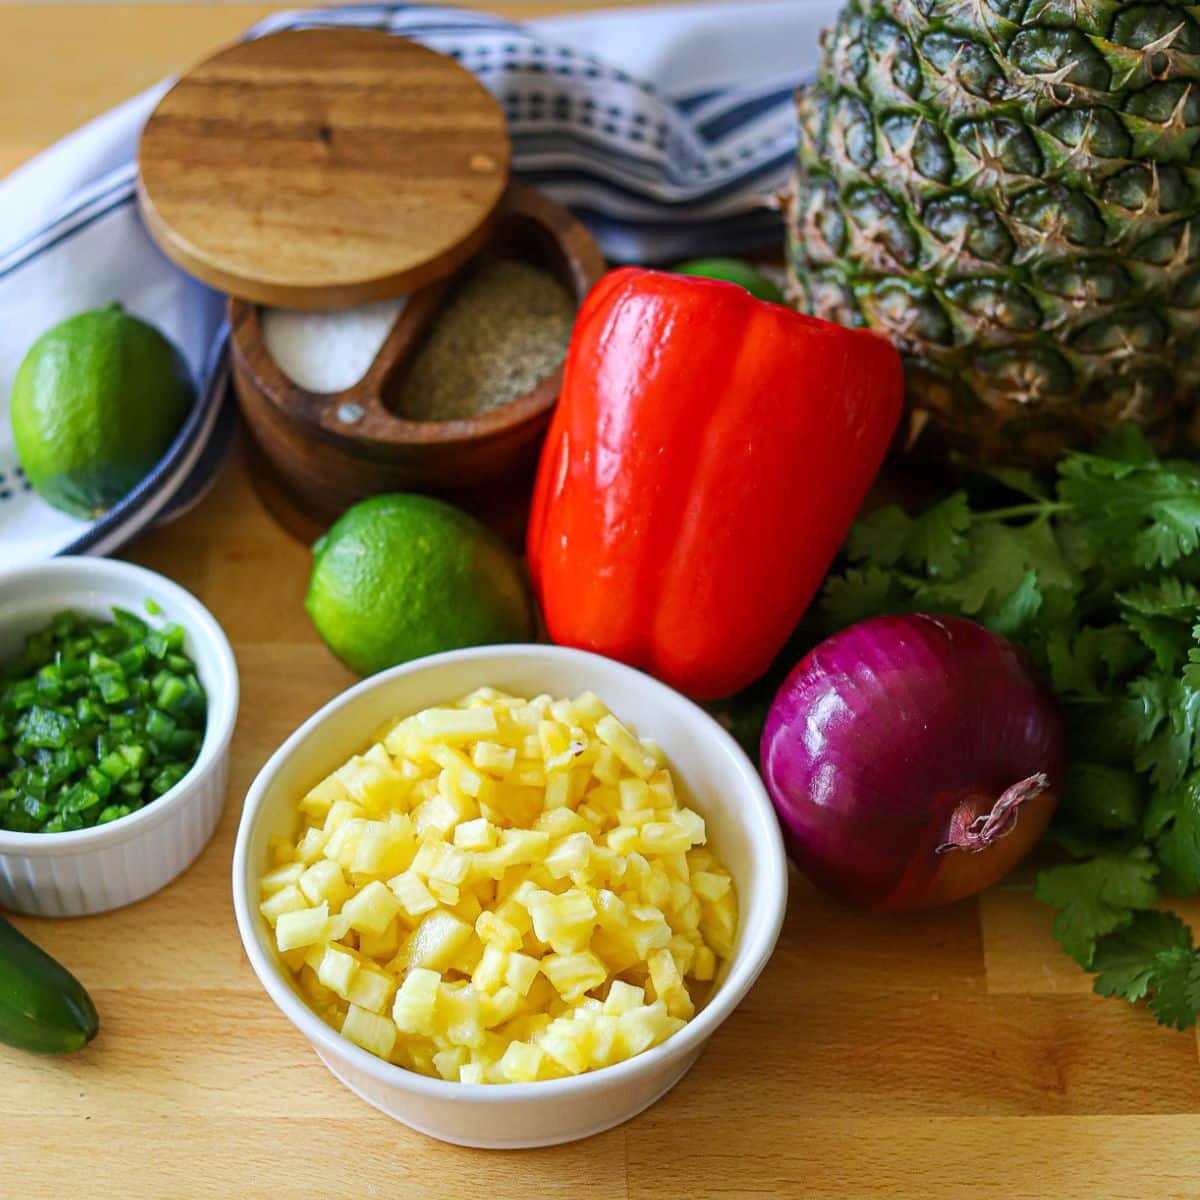 ingredients for homemade pineapple salsa including fresh pineapple, cilantro, red onion, red pepper, limes, salt and pepper.